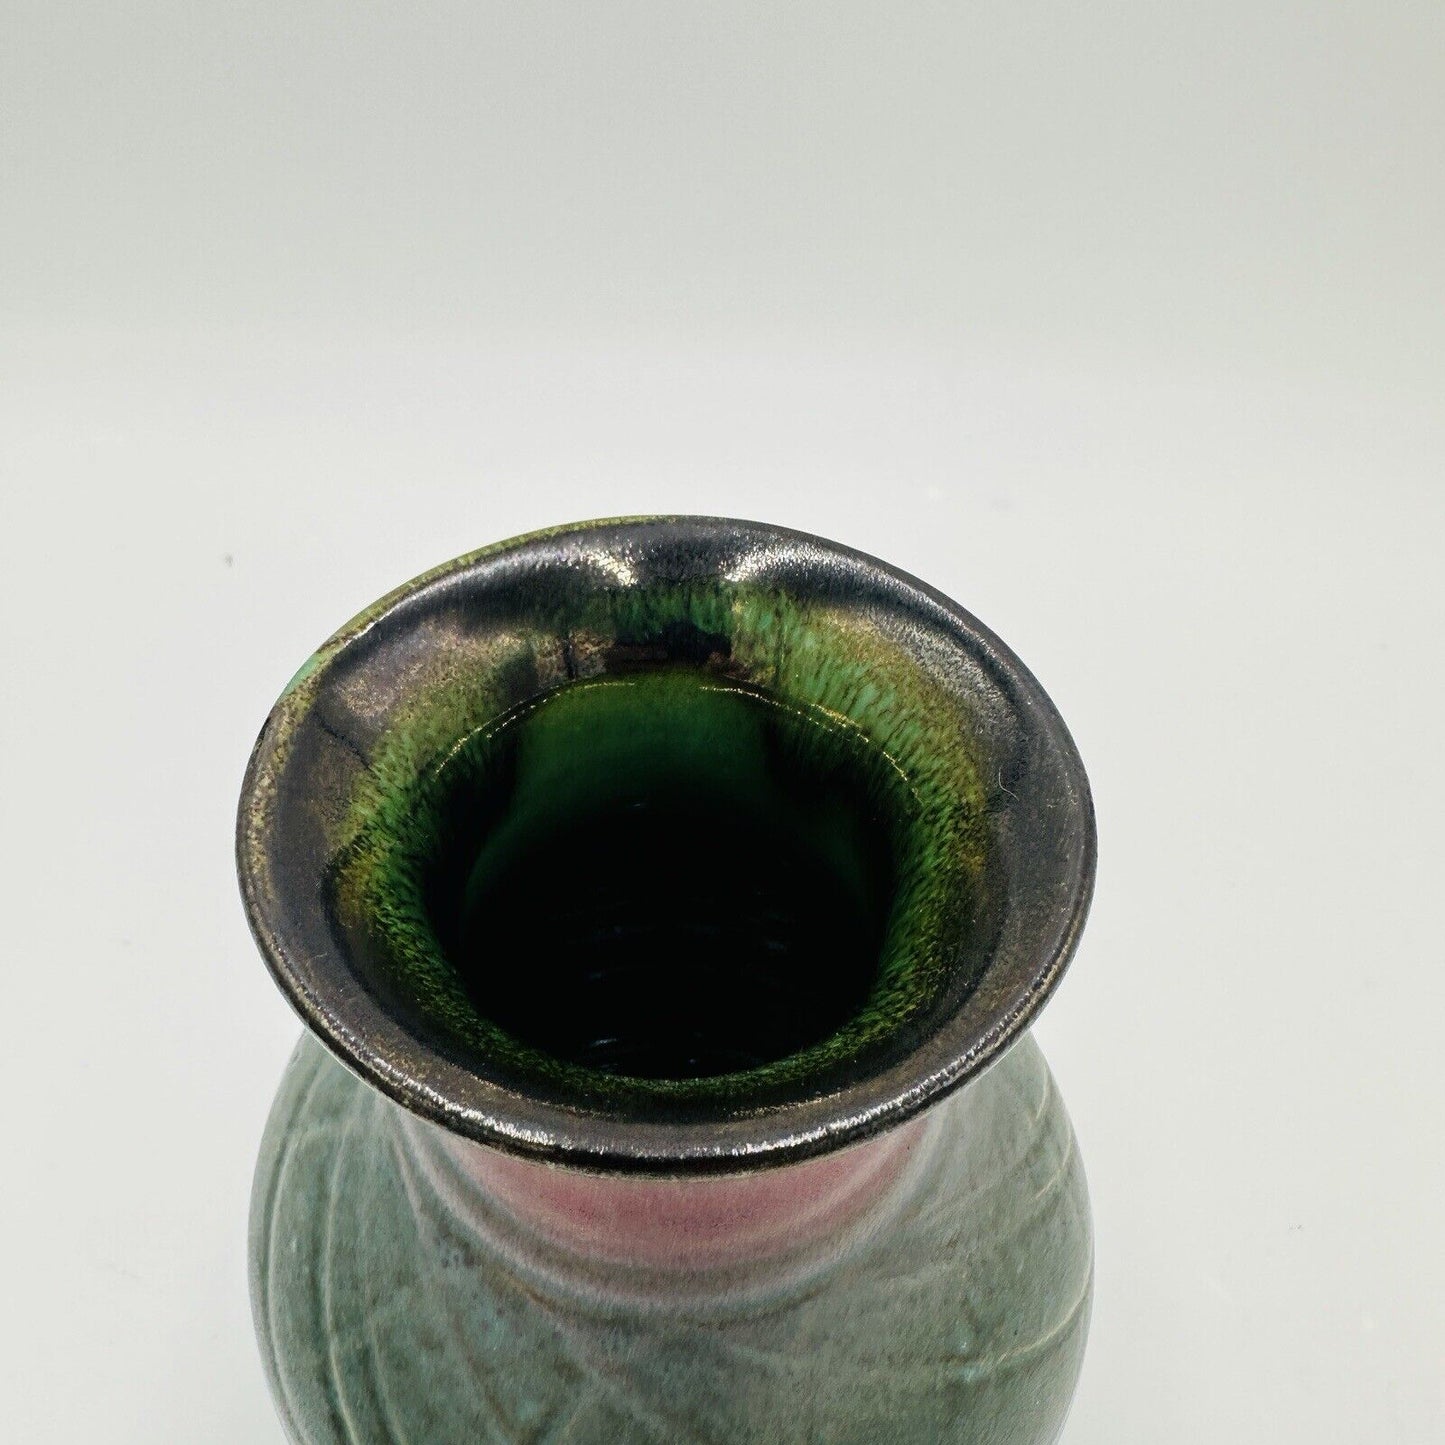 Dryden Hand Thrown Pottery Vase Signed Dated 2010 Purple Green Aqua 6.5”